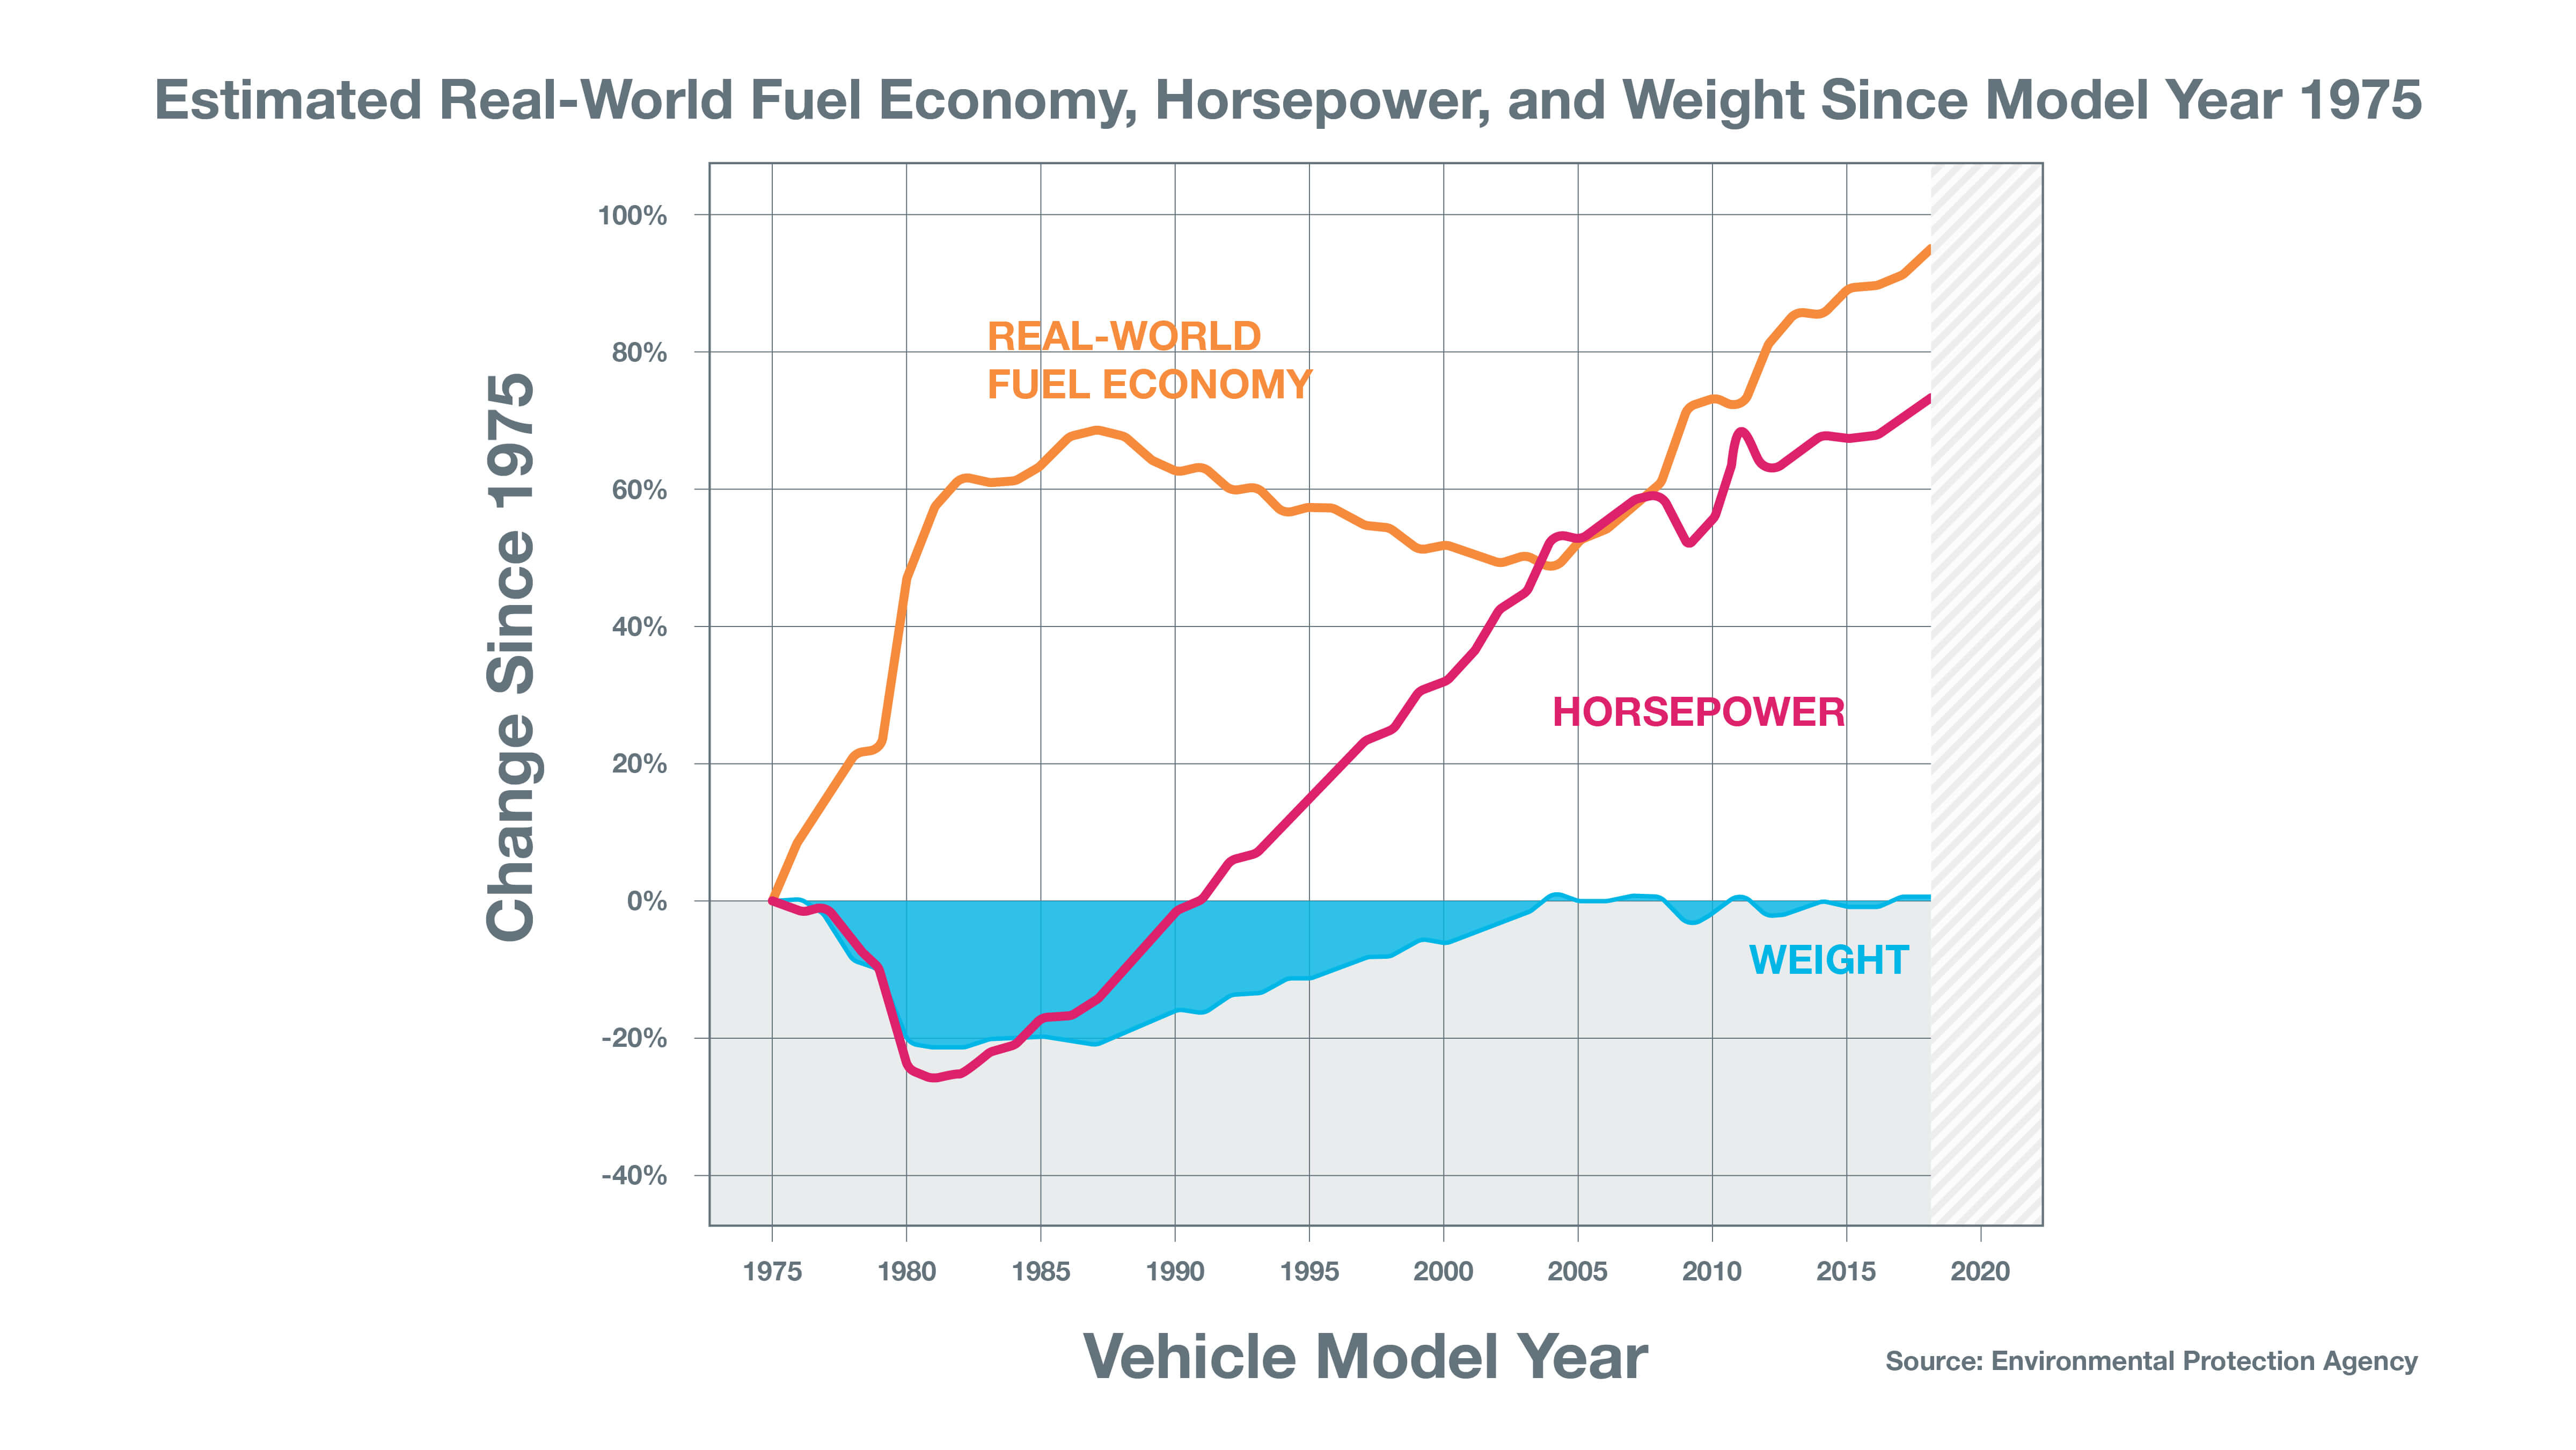 Estimated Real-World Fuel Economy, Horsepower, and Weight Since Model Year 1975